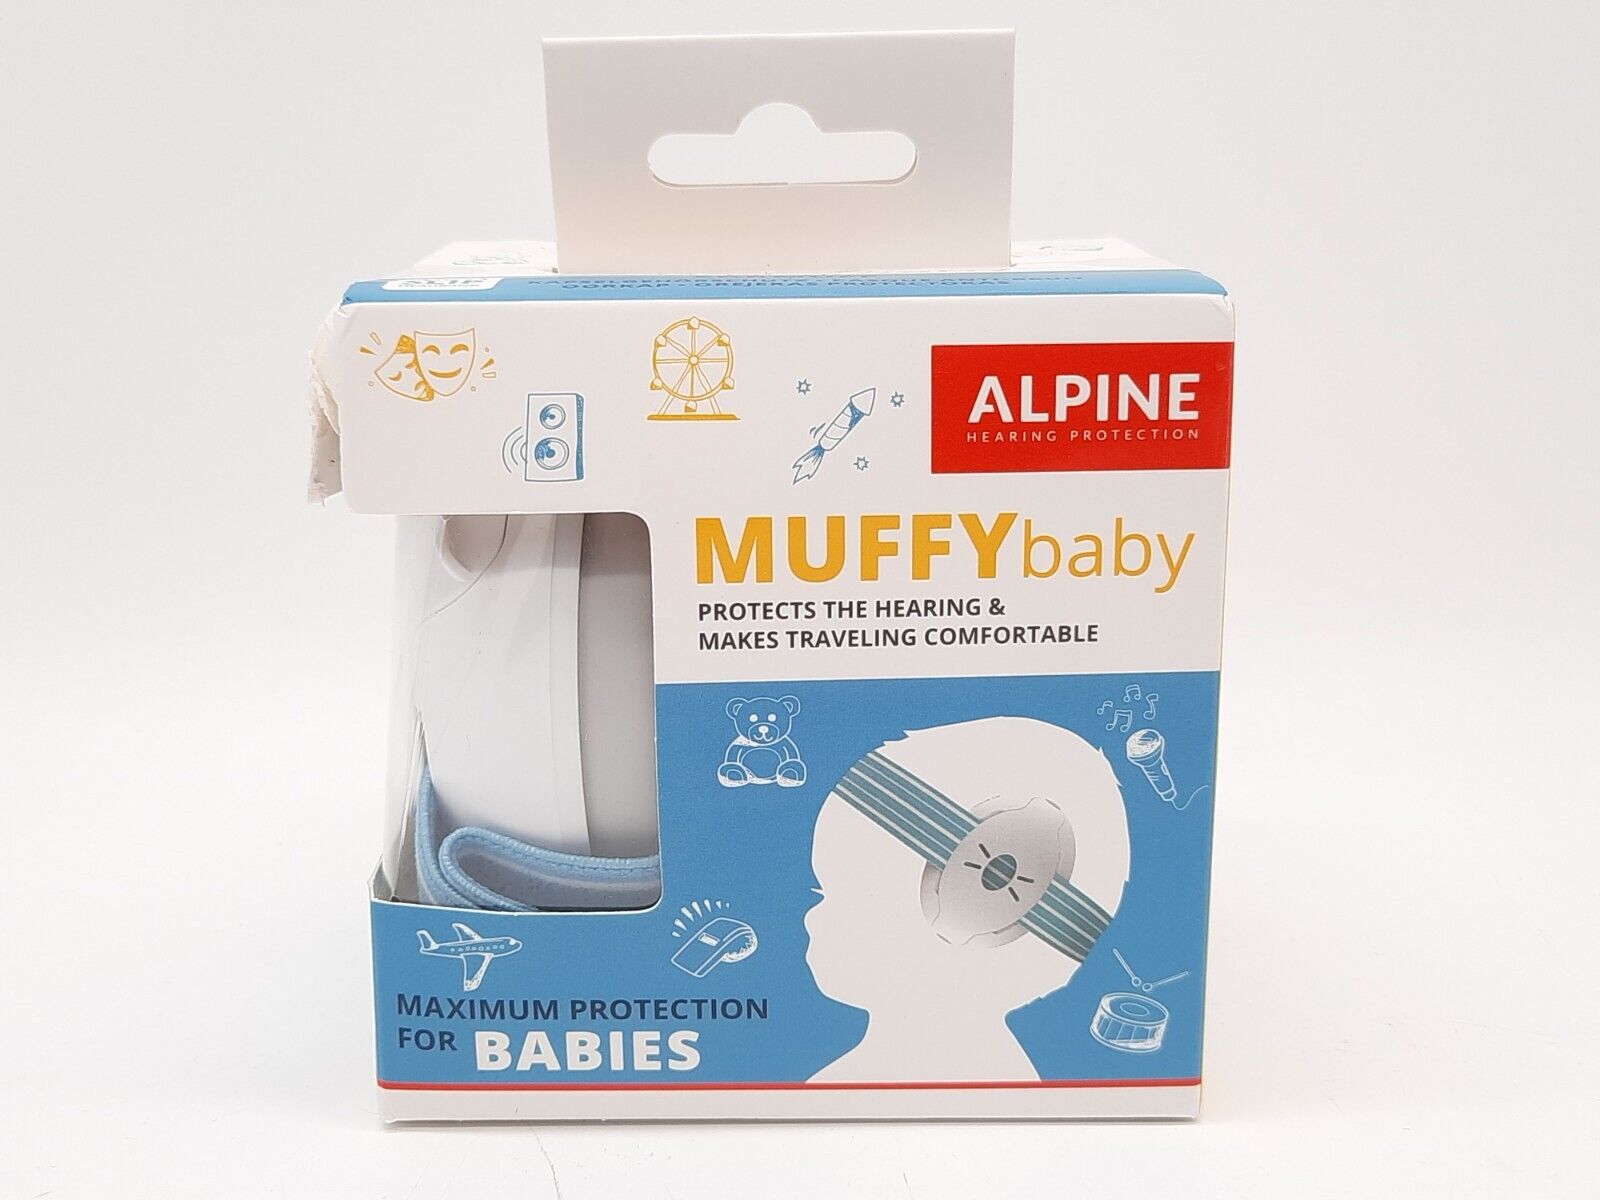 Muffy Baby Alpine Hearing Protection Baby Traveling Ear Muffs w/ Bag NEW